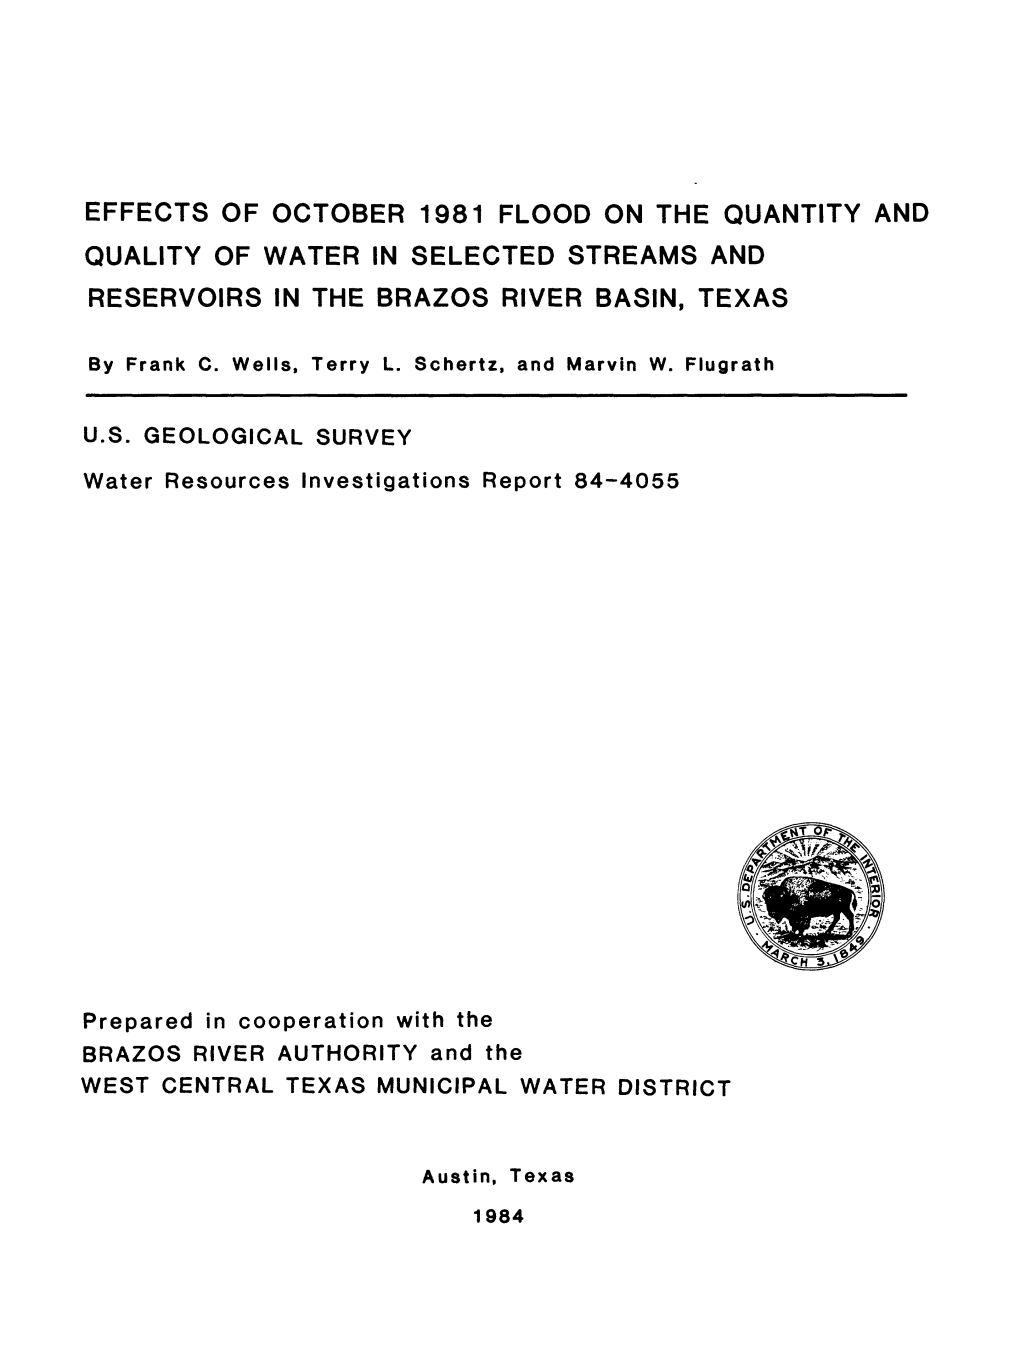 Effects of October 1981 Flood on the Quantity and Quality of Water in Selected Streams and Reservoirs in the Brazos River Basin, Texas